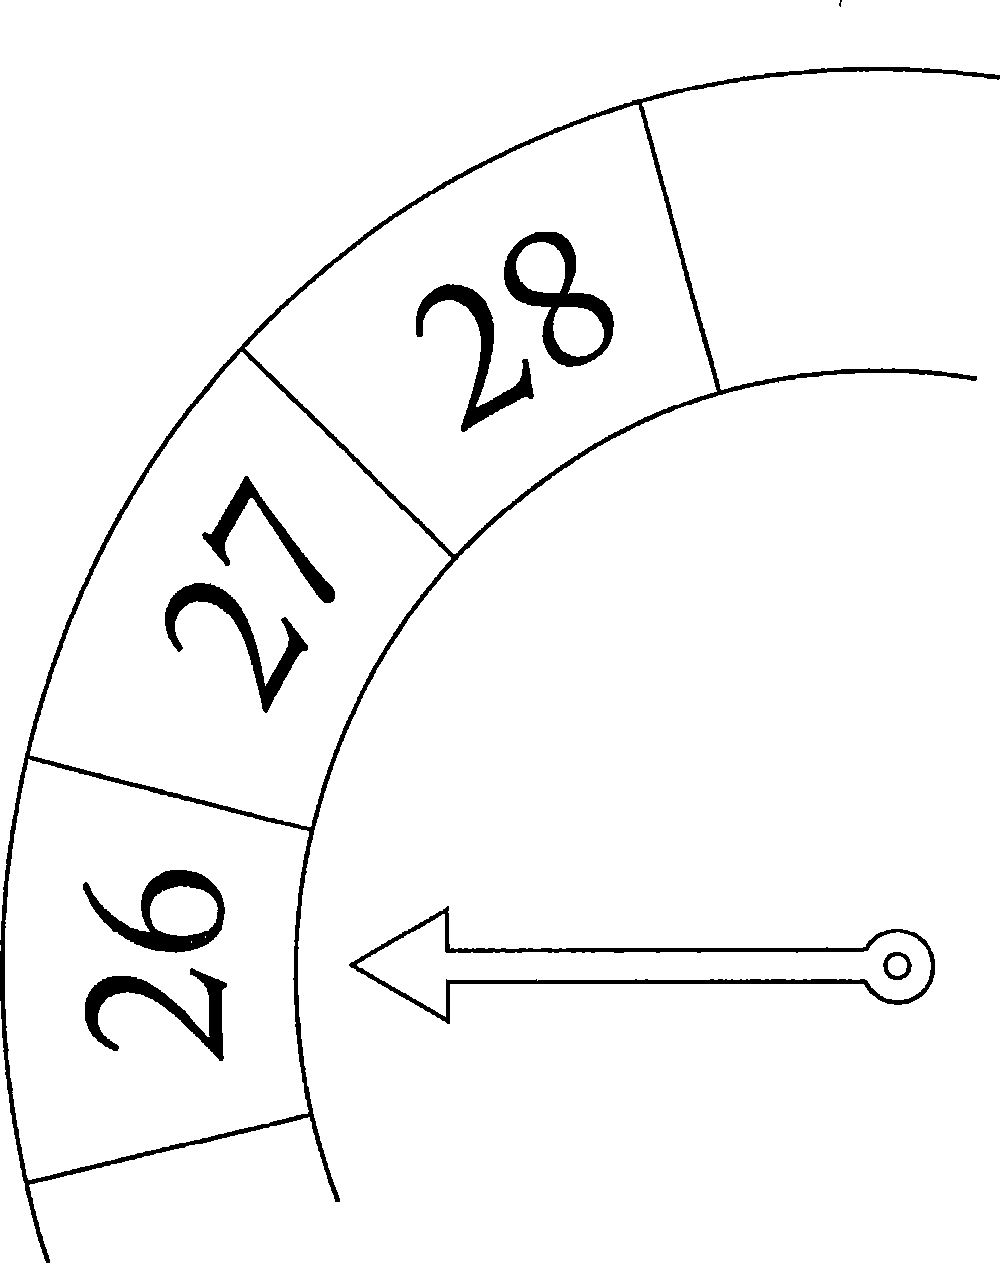 Display apparatus capable of simultaneously displaying date and day and night